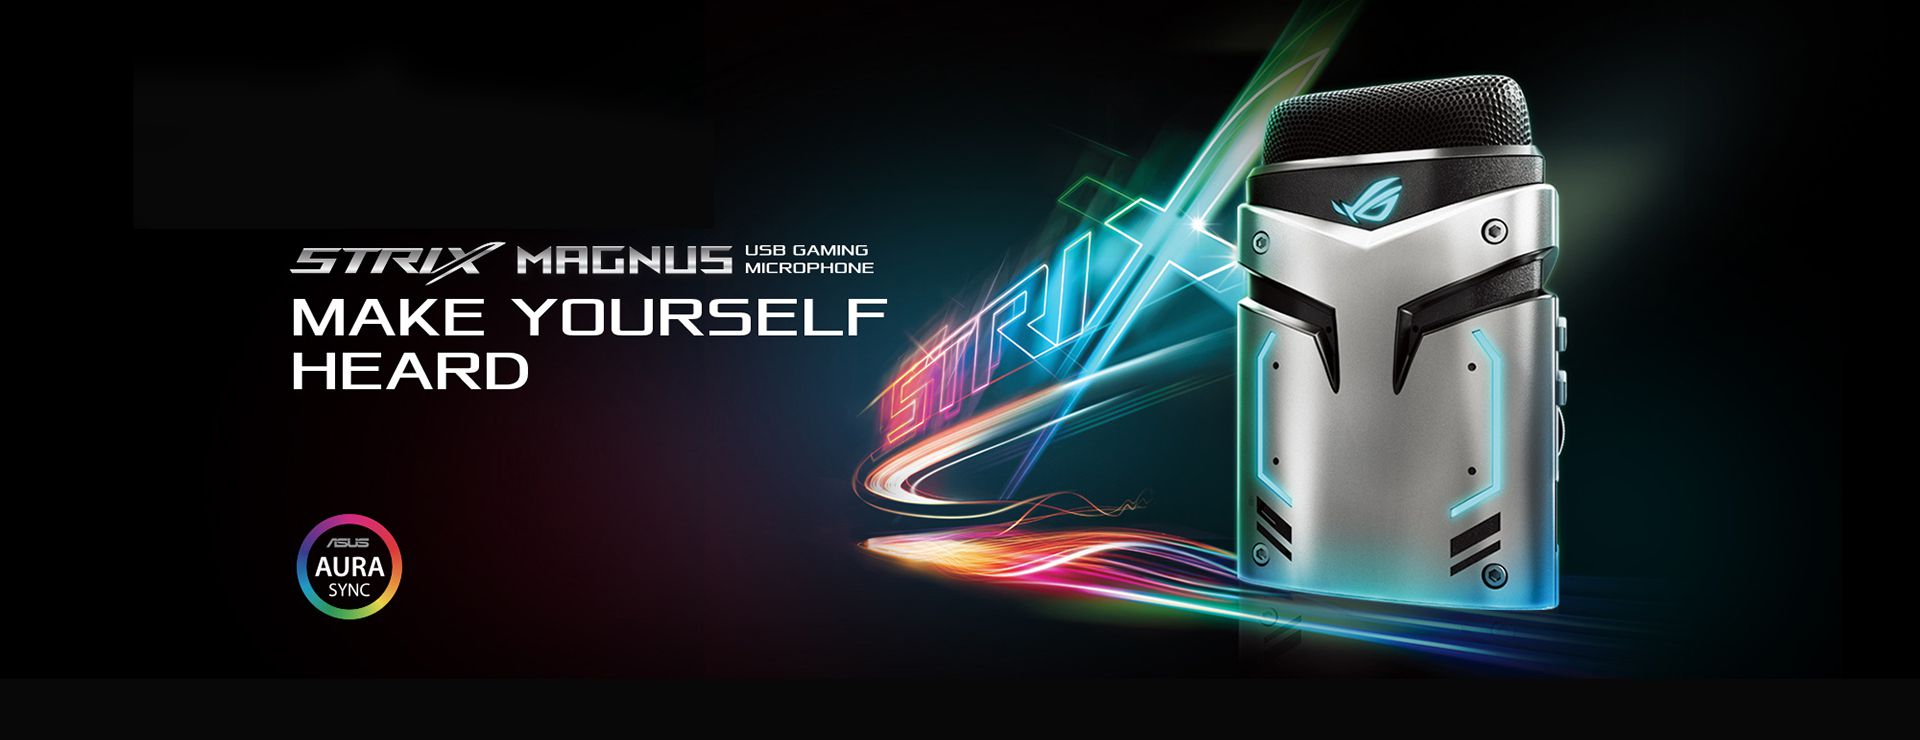 ROG Strix Magnus USB gaming microphone product photo with a glowing Strix logo in the background and a ASUS Aura Sync icon